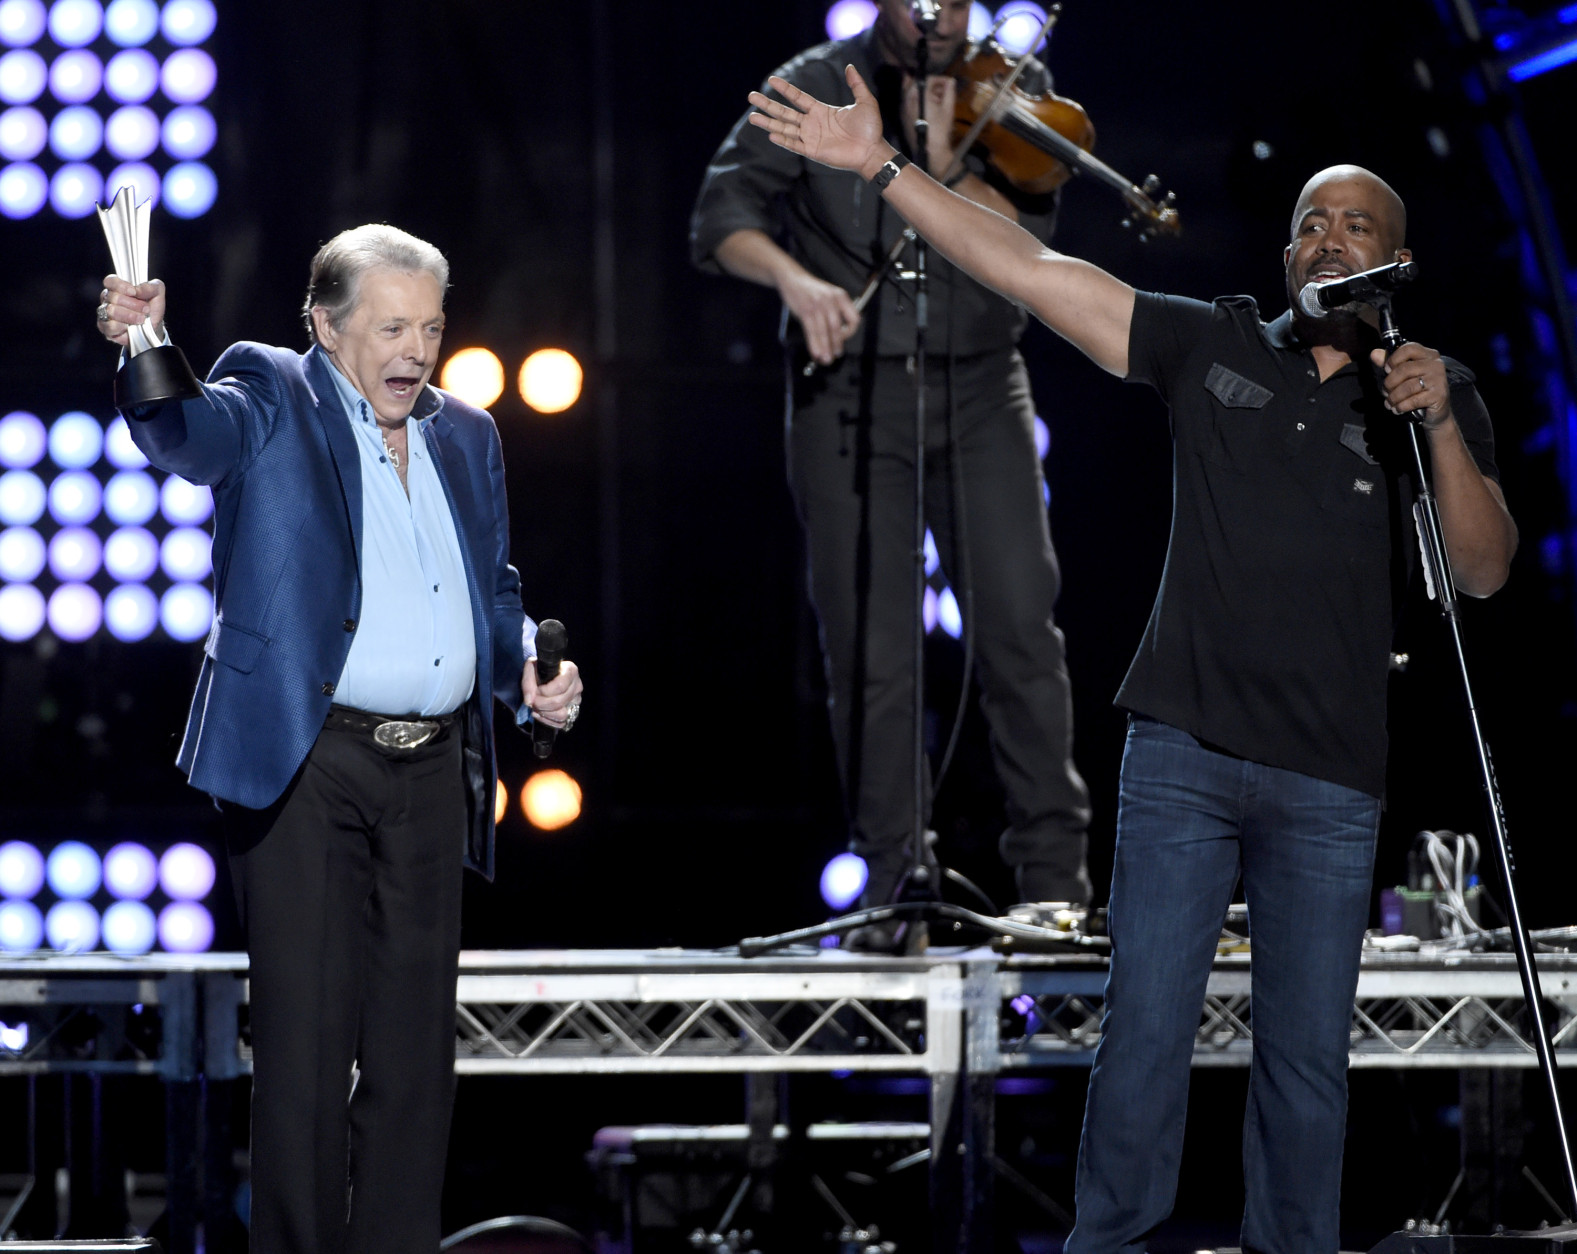 Mickey Gilley accepts the triple crown award at ACM Presents Superstar Duets at Globe Life Park on Friday, April 17, 2015, in Arlington, Texas. Looking on at right is Darius Rucker. (Photo by Chris Pizzello/Invision/AP)